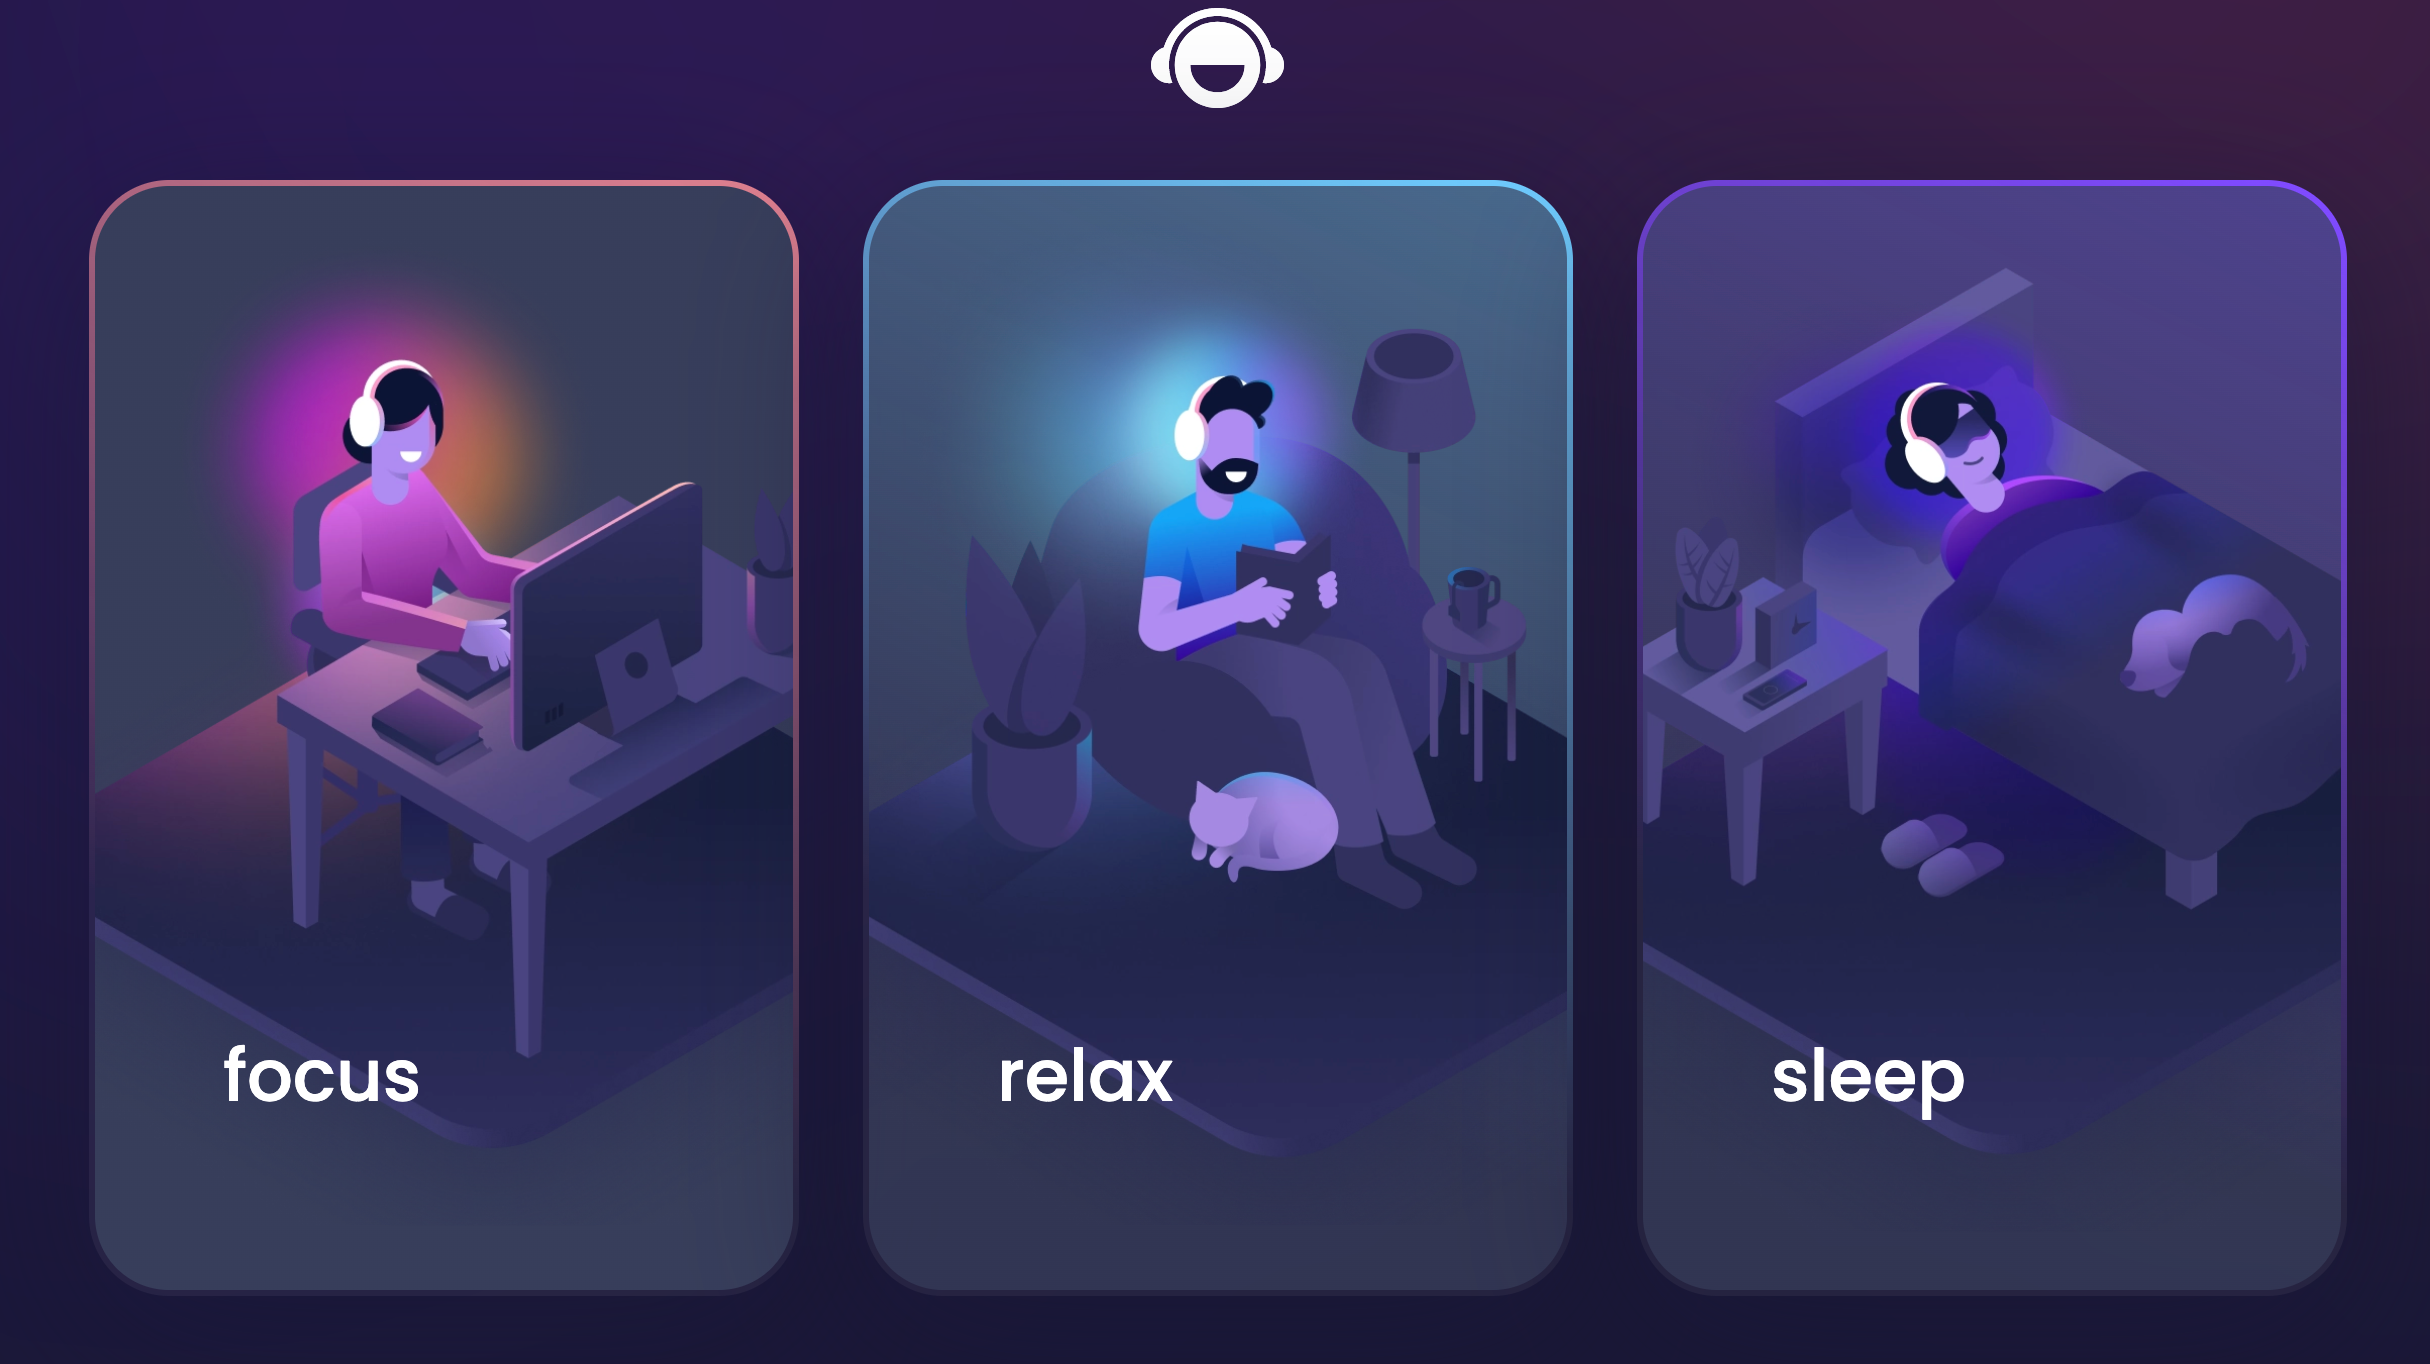 Brain.fm images showing animated characters focusing, relaxing, and sleeping